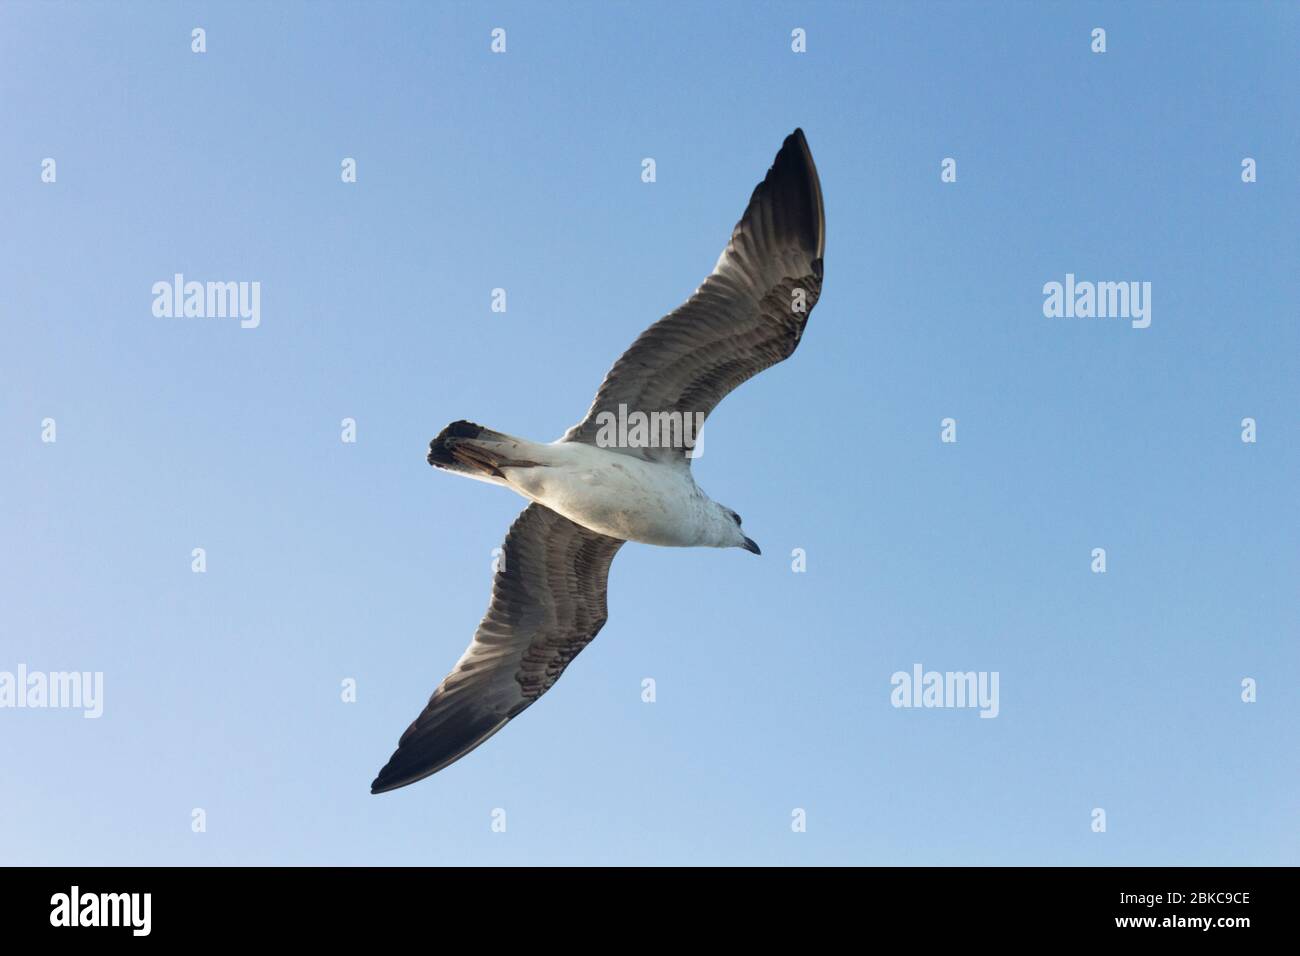 Seagull high in the sky. Stock Photo